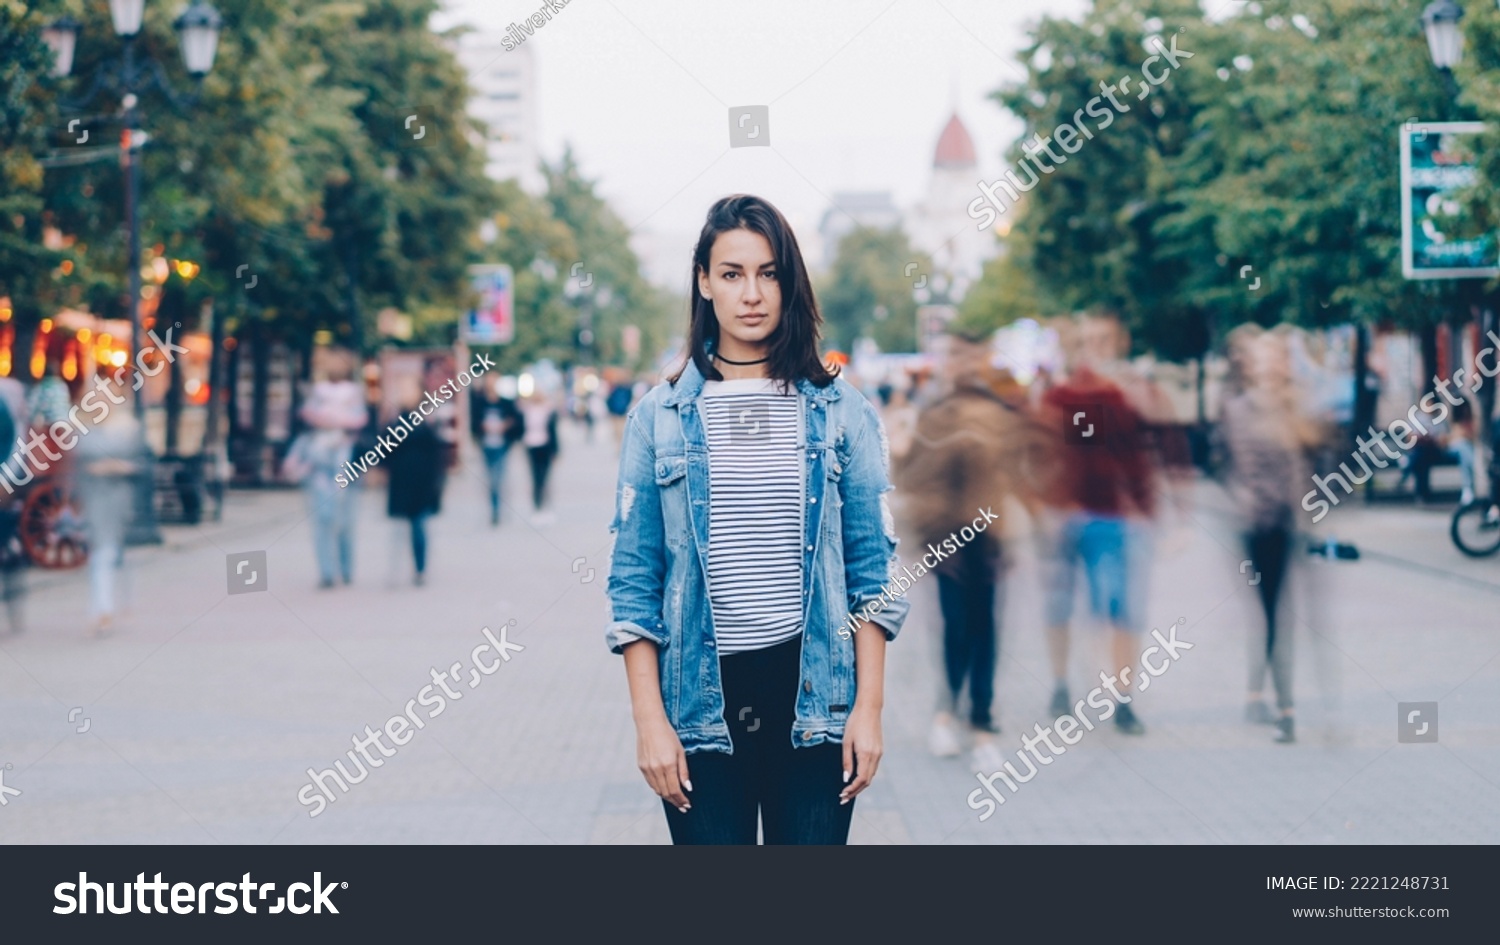 portrait of tired young woman student standing alone in city center and looking at camera with straight face while crowds of men and women are whizzing around. #2221248731